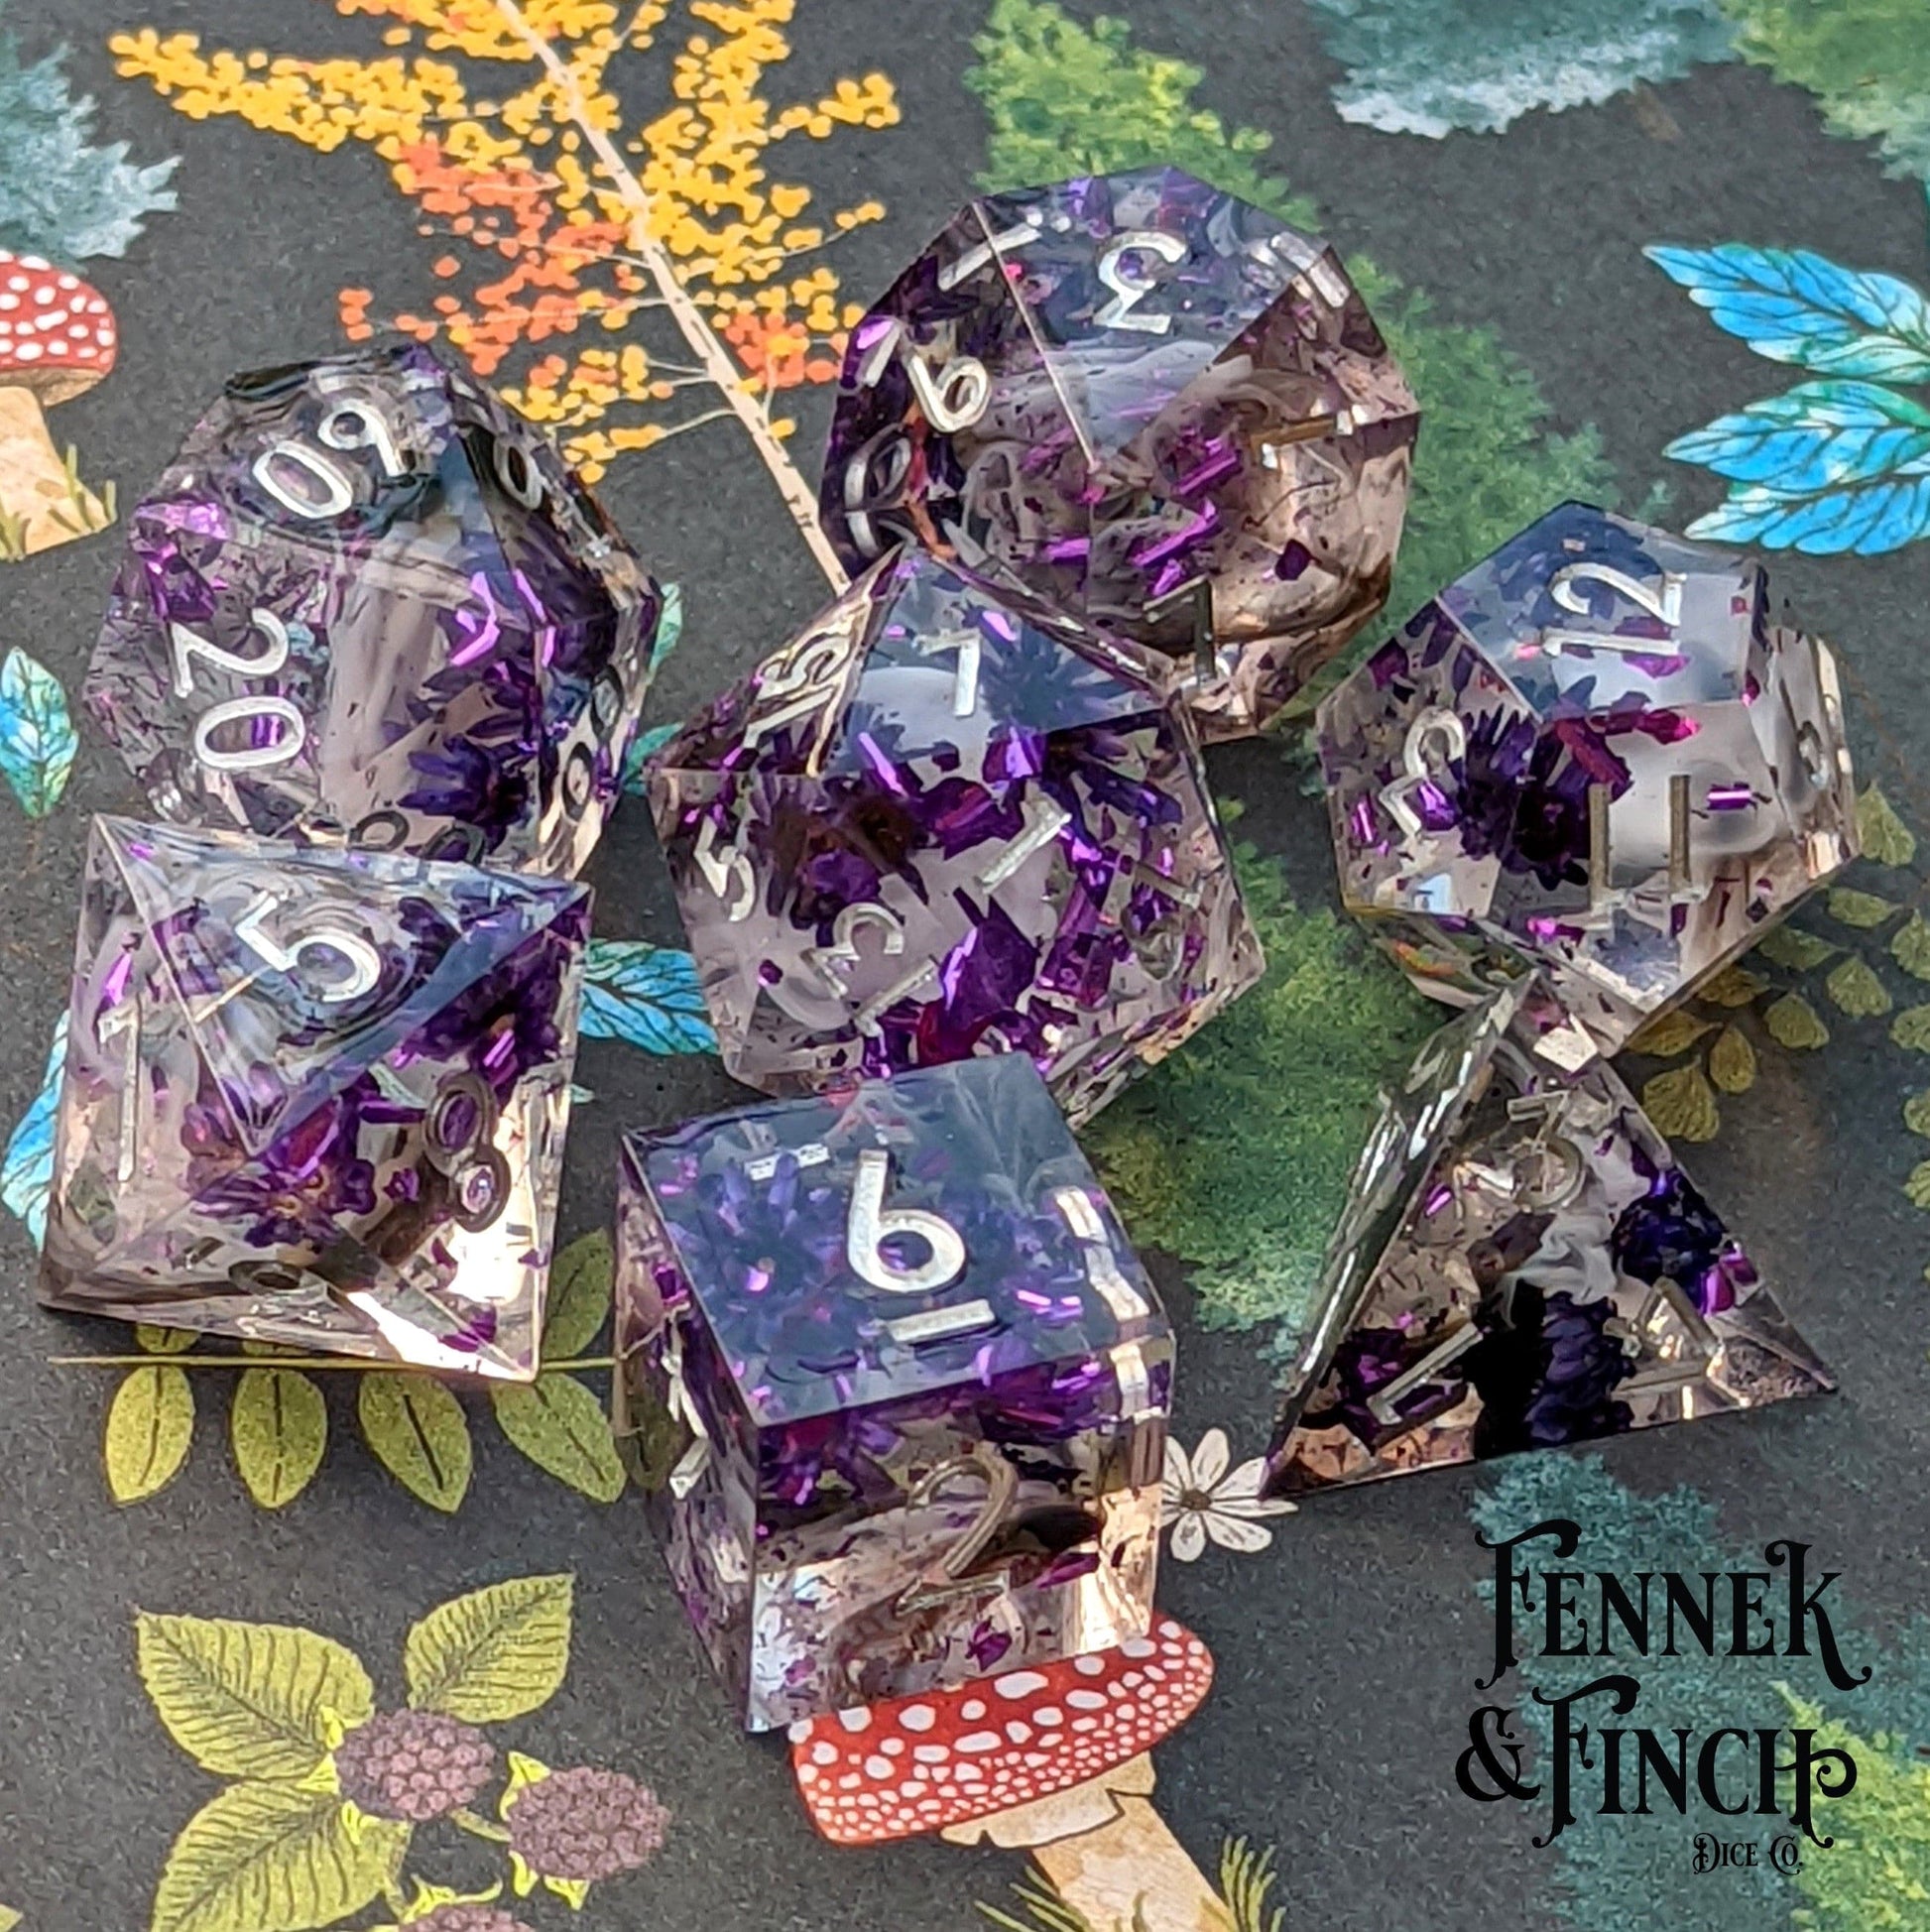 Gentle Repose Handmade Sharp Edge Resin Dice Set. 7 Piece DND dice set with real Dried Flowers